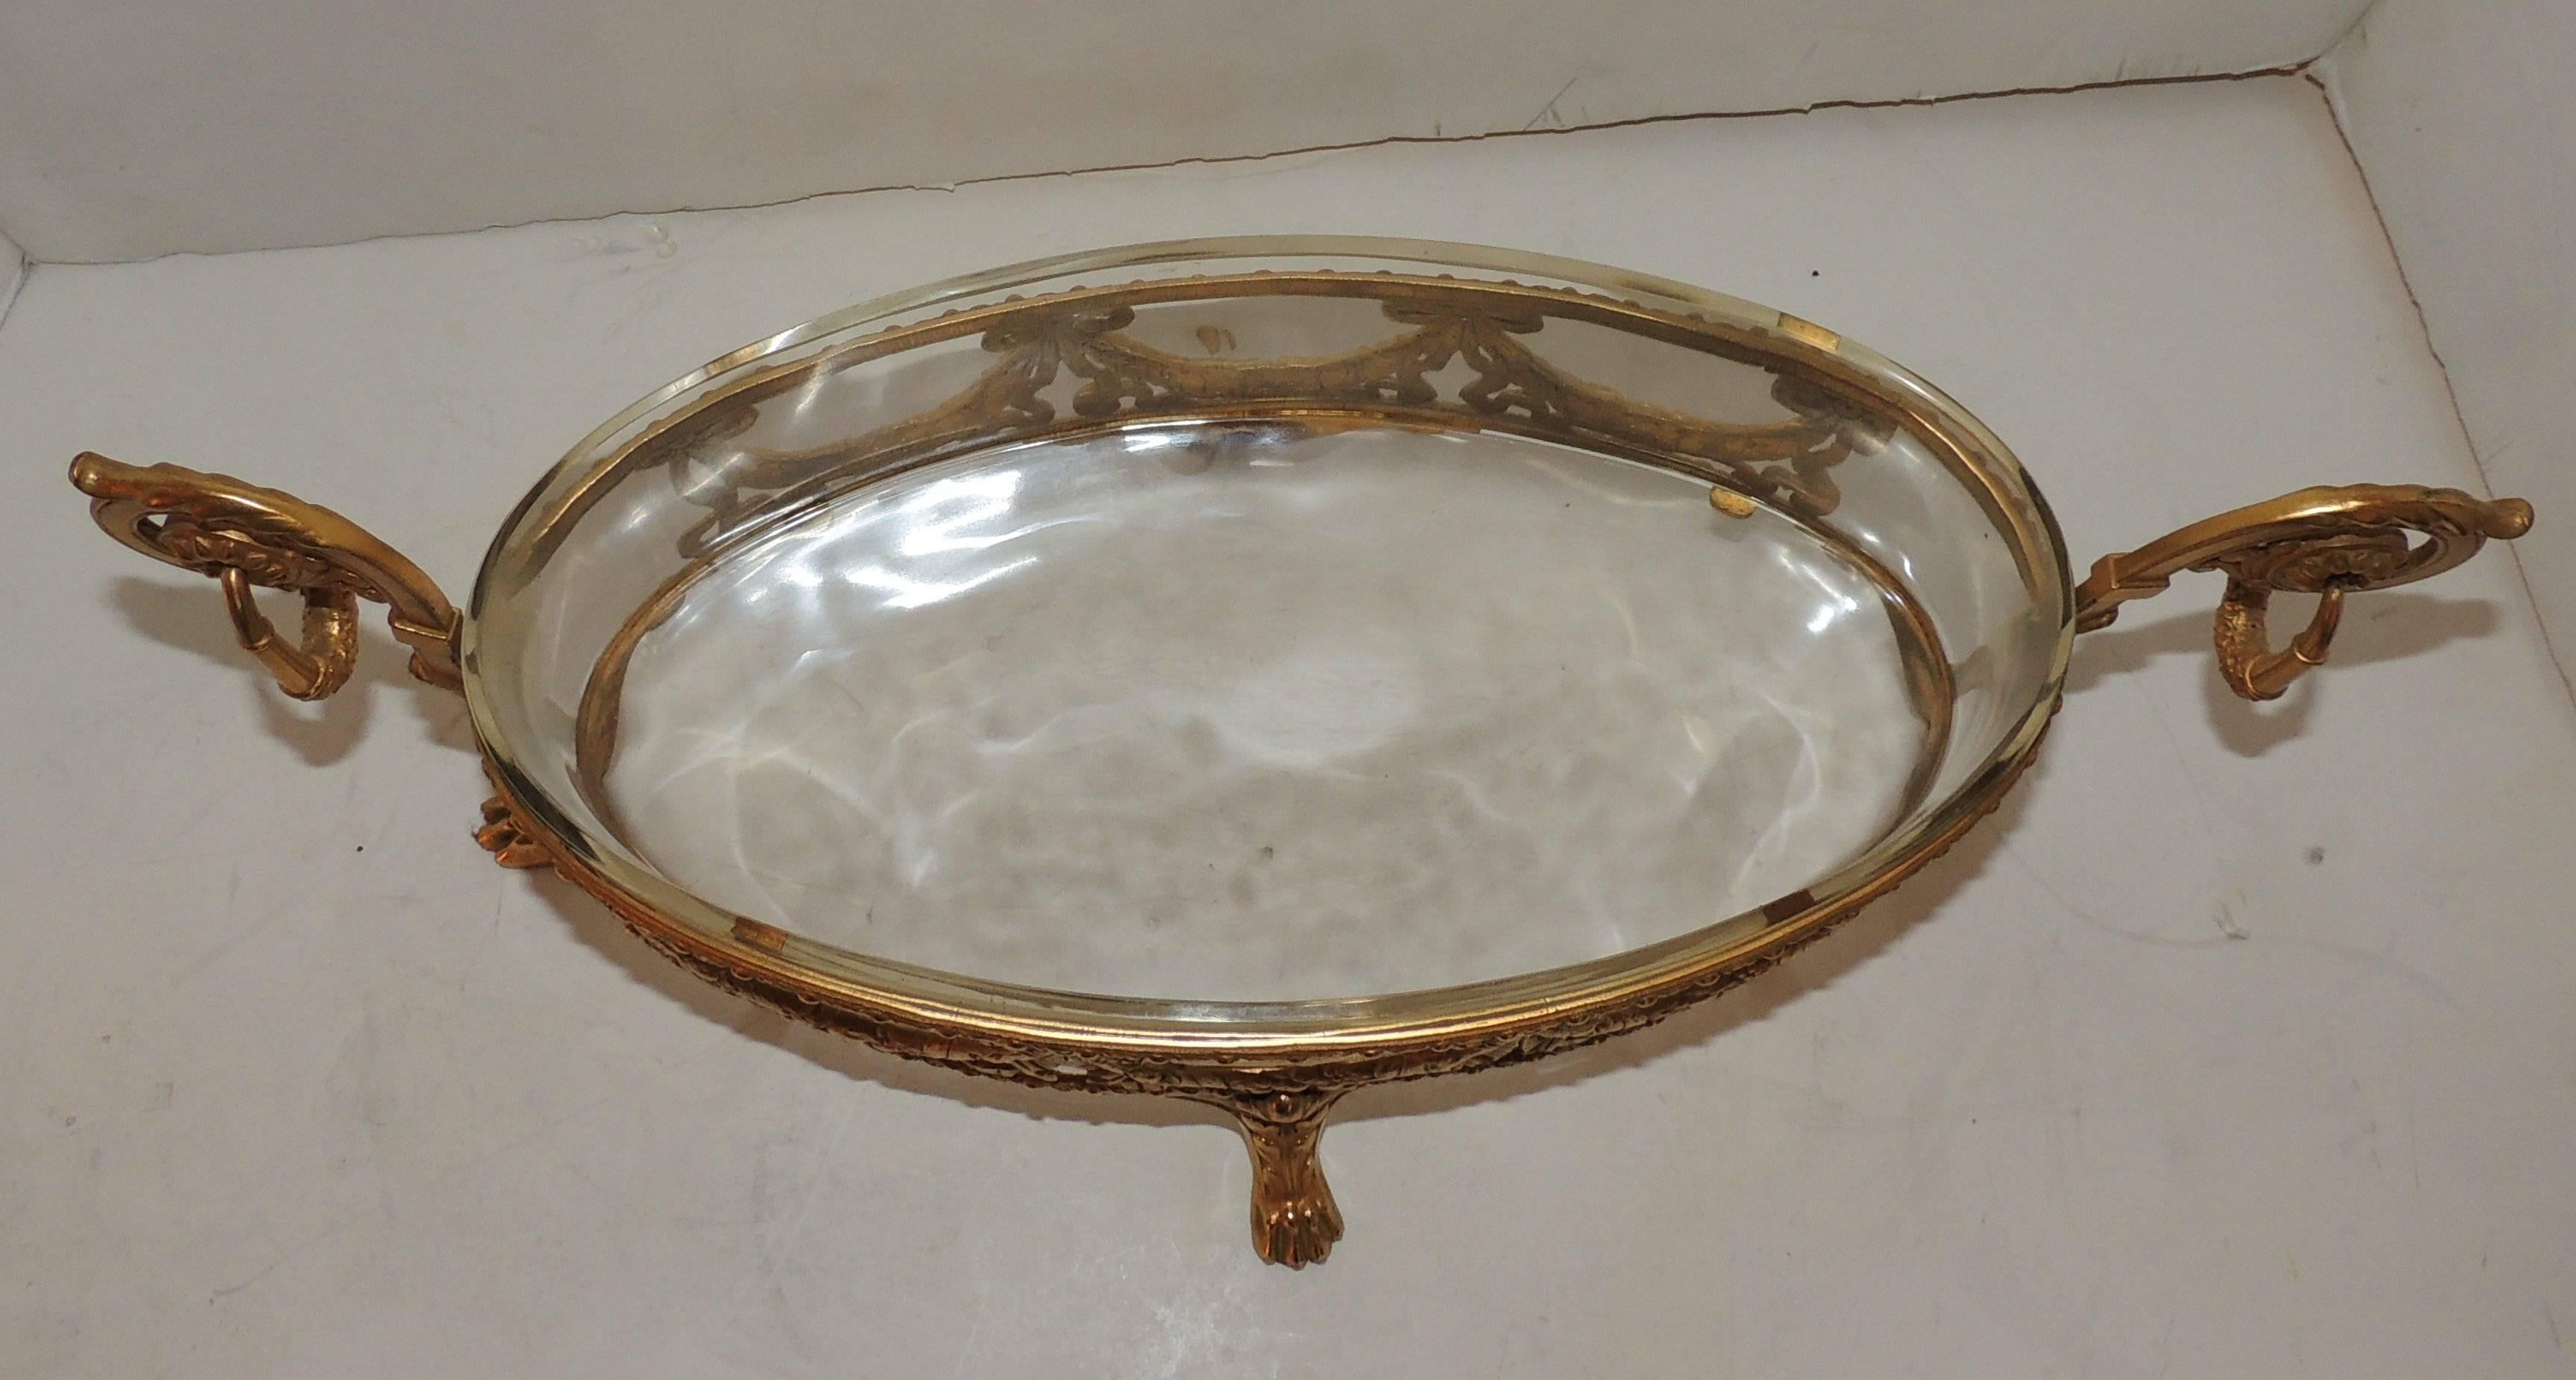 Dore Bronze Crystal Oval Bowl Centerpiece Ormolu Bows Filigree Swag Paw Feet In Good Condition For Sale In Roslyn, NY